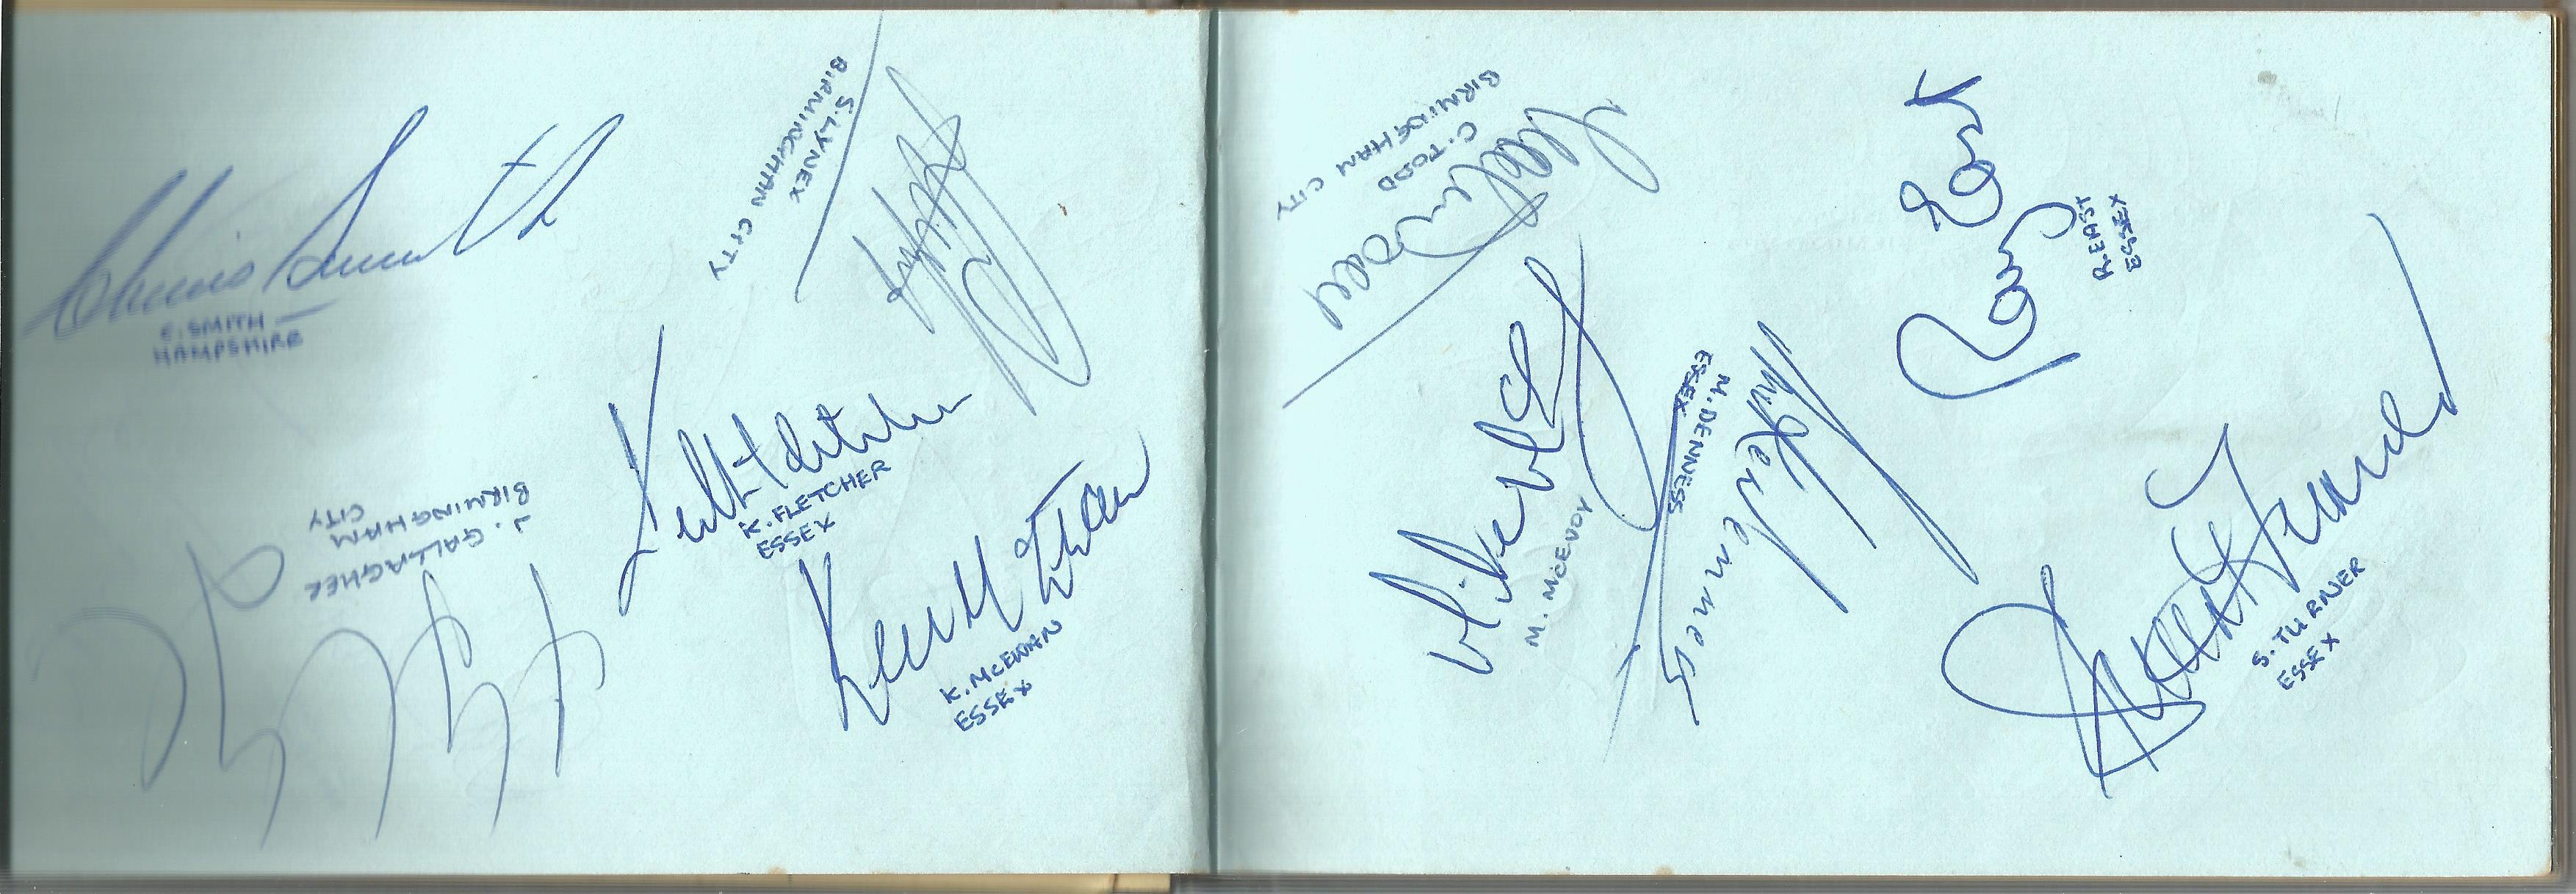 Football and Cricket Legends Autograph book over 150 signatures from some legendary names of the - Image 4 of 8